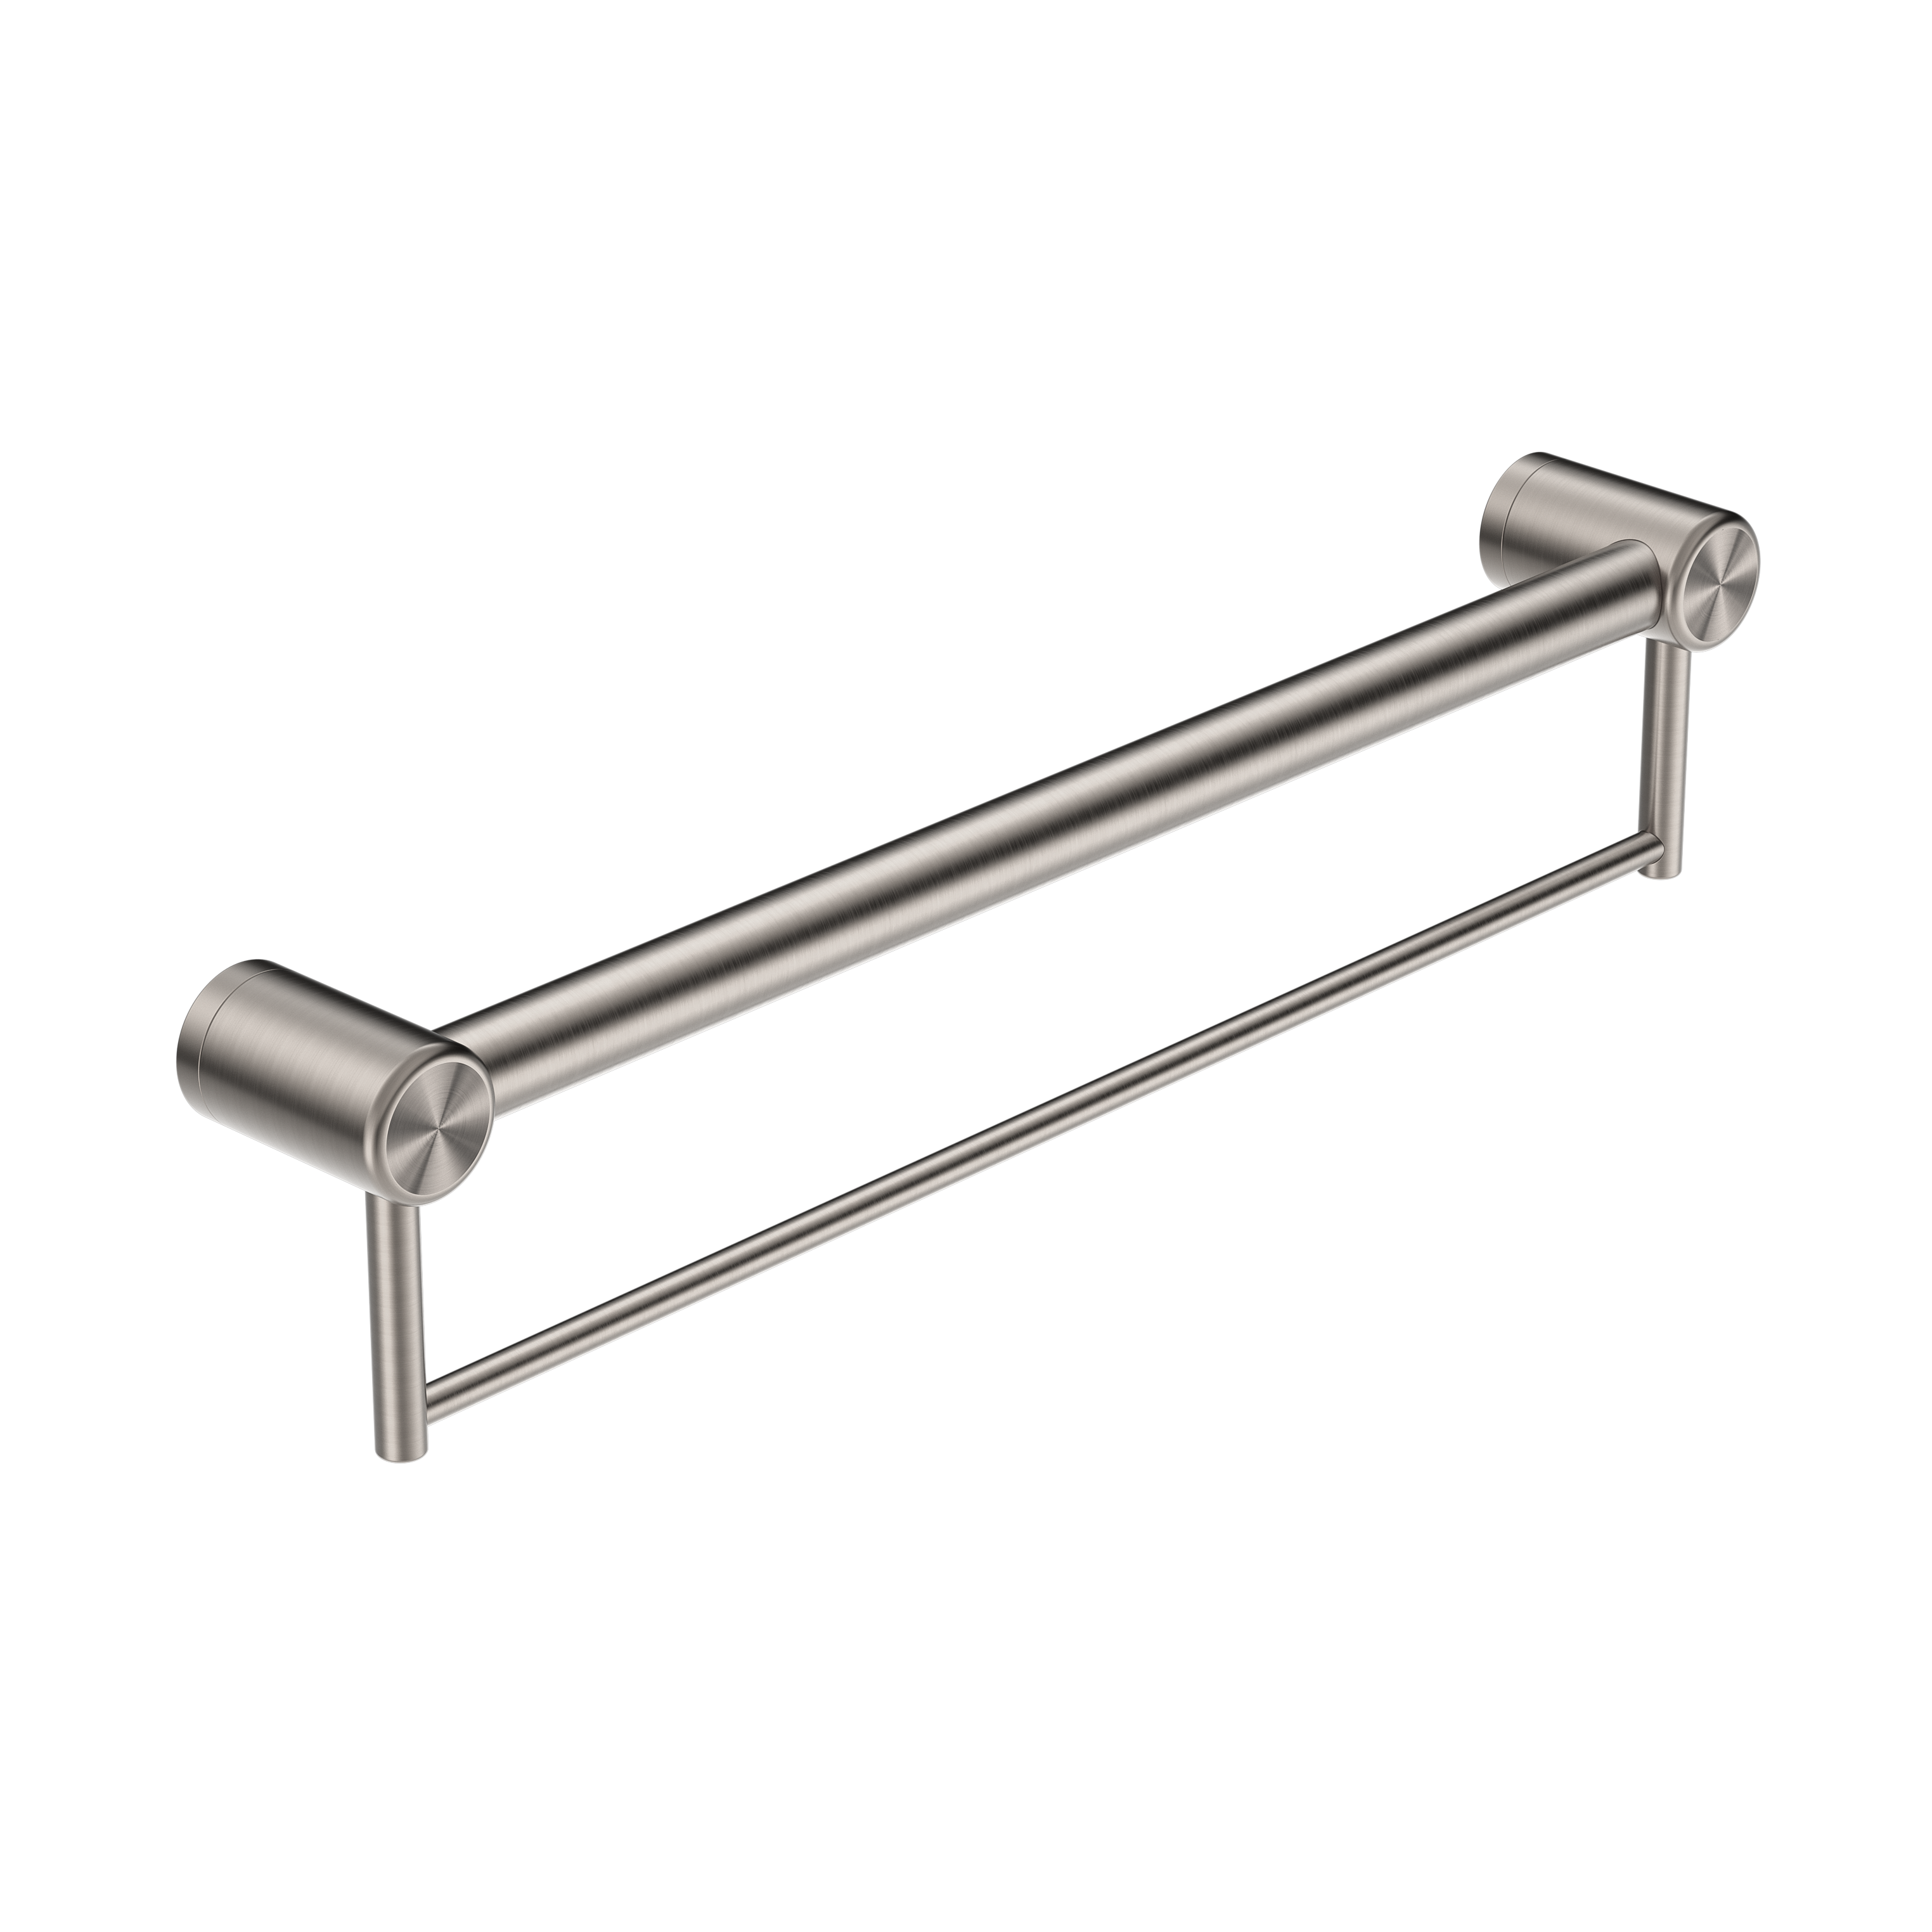 CALIBRE MECCA 32MM GRAB RAIL WITH TOWEL HOLDER 600MM BRUSHED NICKEL